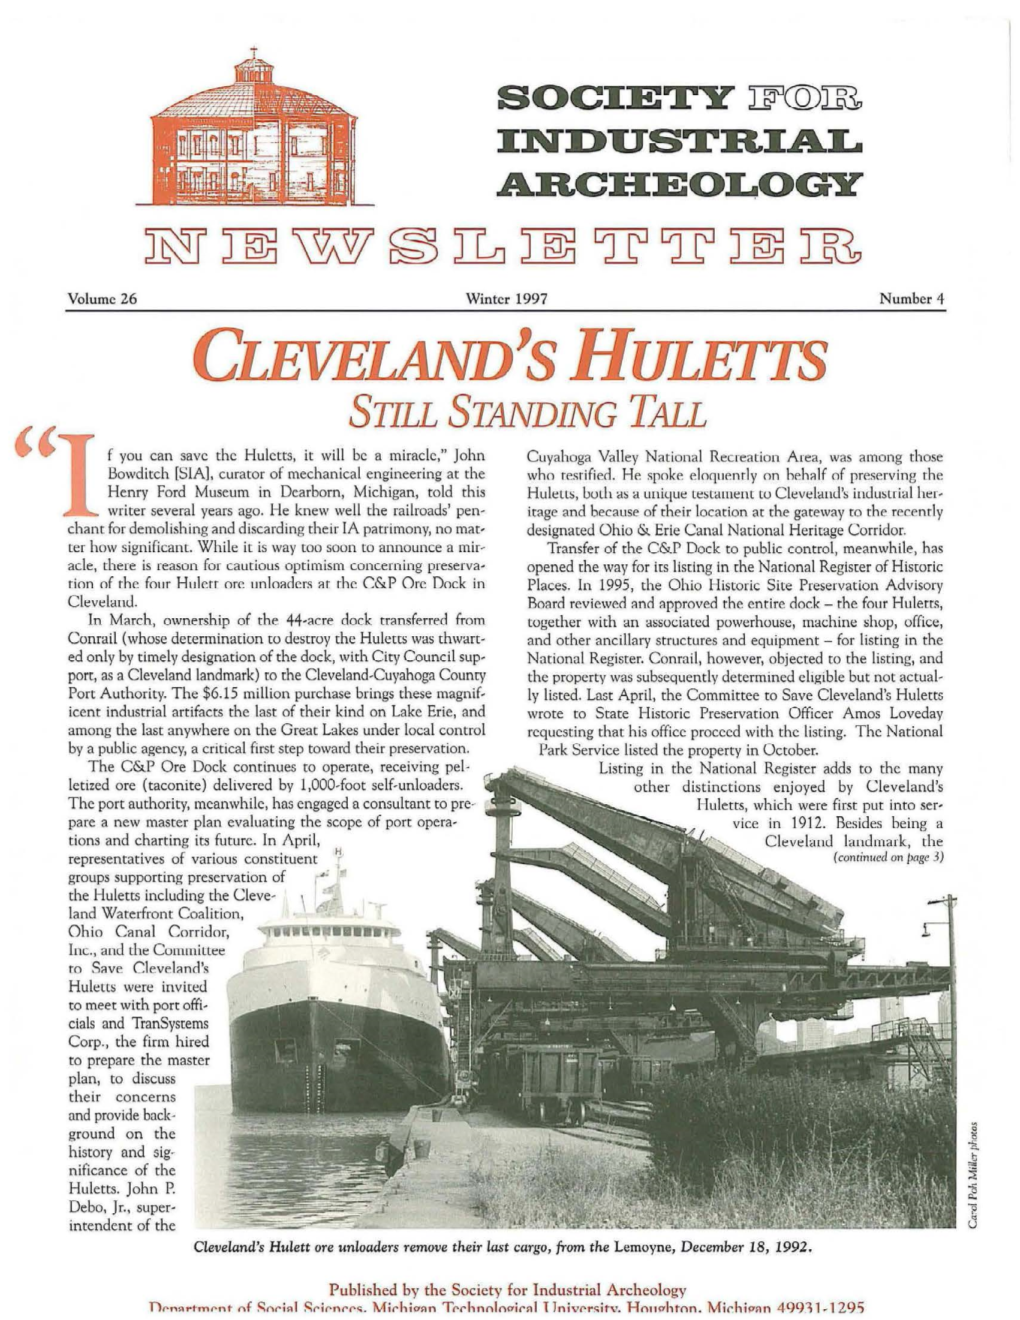 Cleveland's Huletts Still Standing Tall